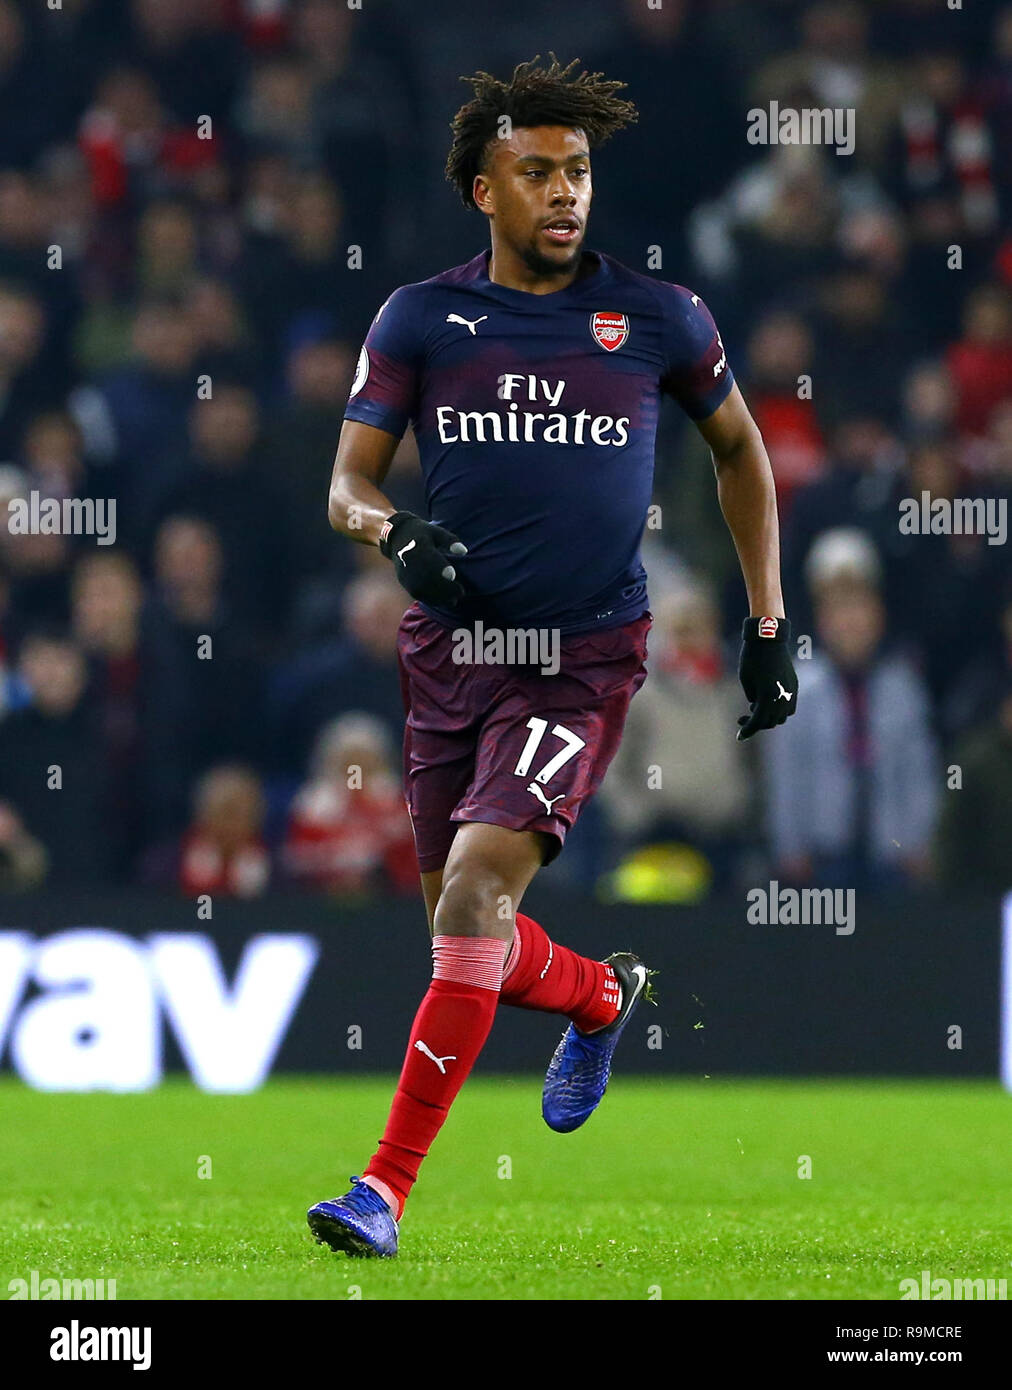 Arsenal's Alex Iwobi during the Premier League match at the AMEX Stadium, Brighton. PRESS ASSOCIATION Photo. Picture date: Wednesday December 26, 2018. See PA story SOCCER Brighton. Photo credit should read: Gareth Fuller/PA Wire. RESTRICTIONS: No use with unauthorised audio, video, data, fixture lists, club/league logos or 'live' services. Online in-match use limited to 120 images, no video emulation. No use in betting, games or single club/league/player publications. Stock Photo